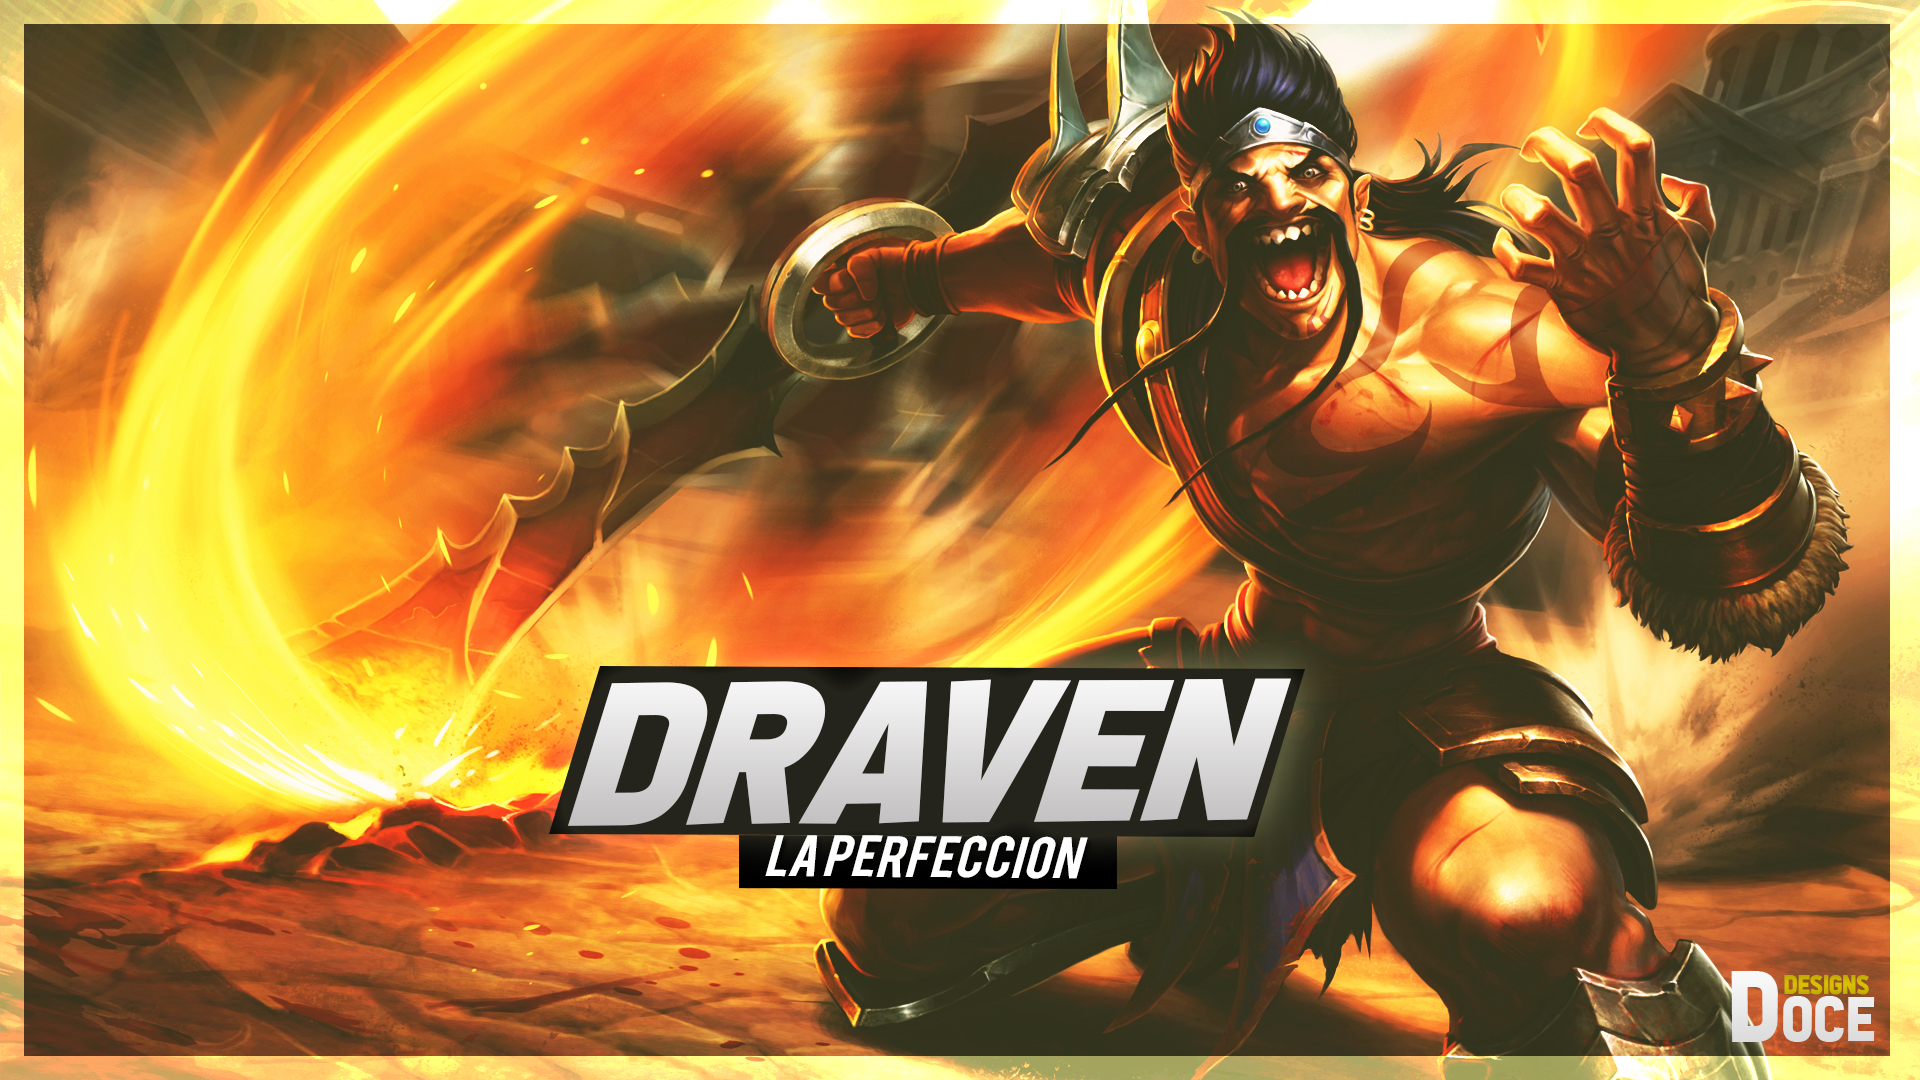 General 1920x1080 League of Legends Draven (League of Legends) PC gaming video game warriors warrior